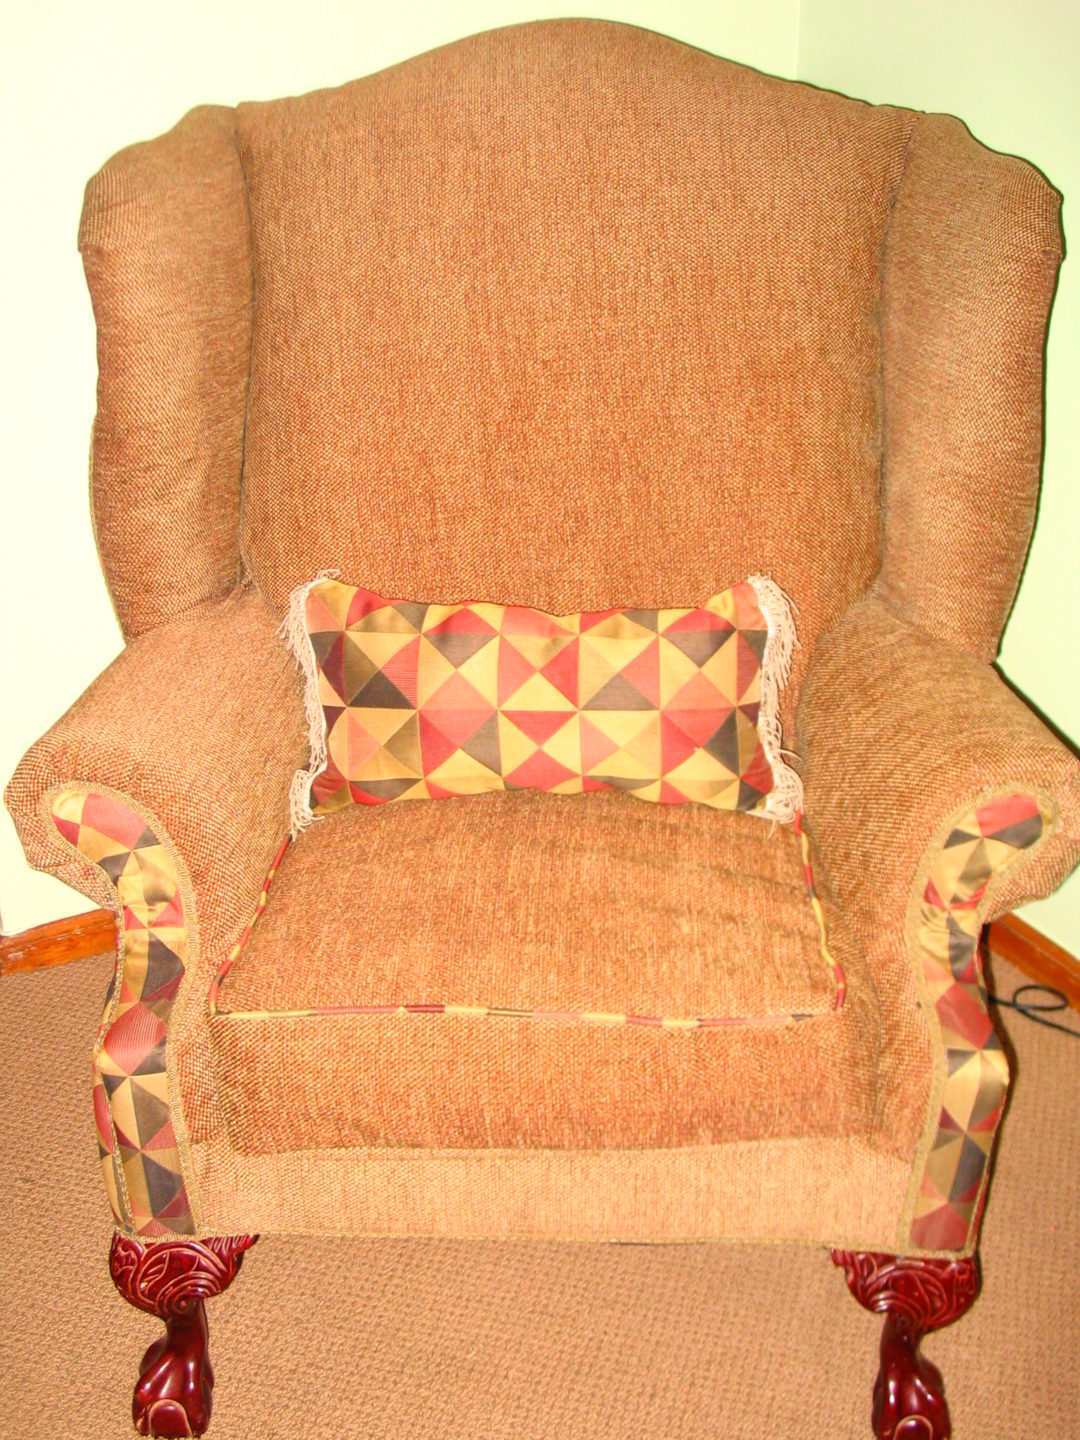 Cozy Reupholstered chair